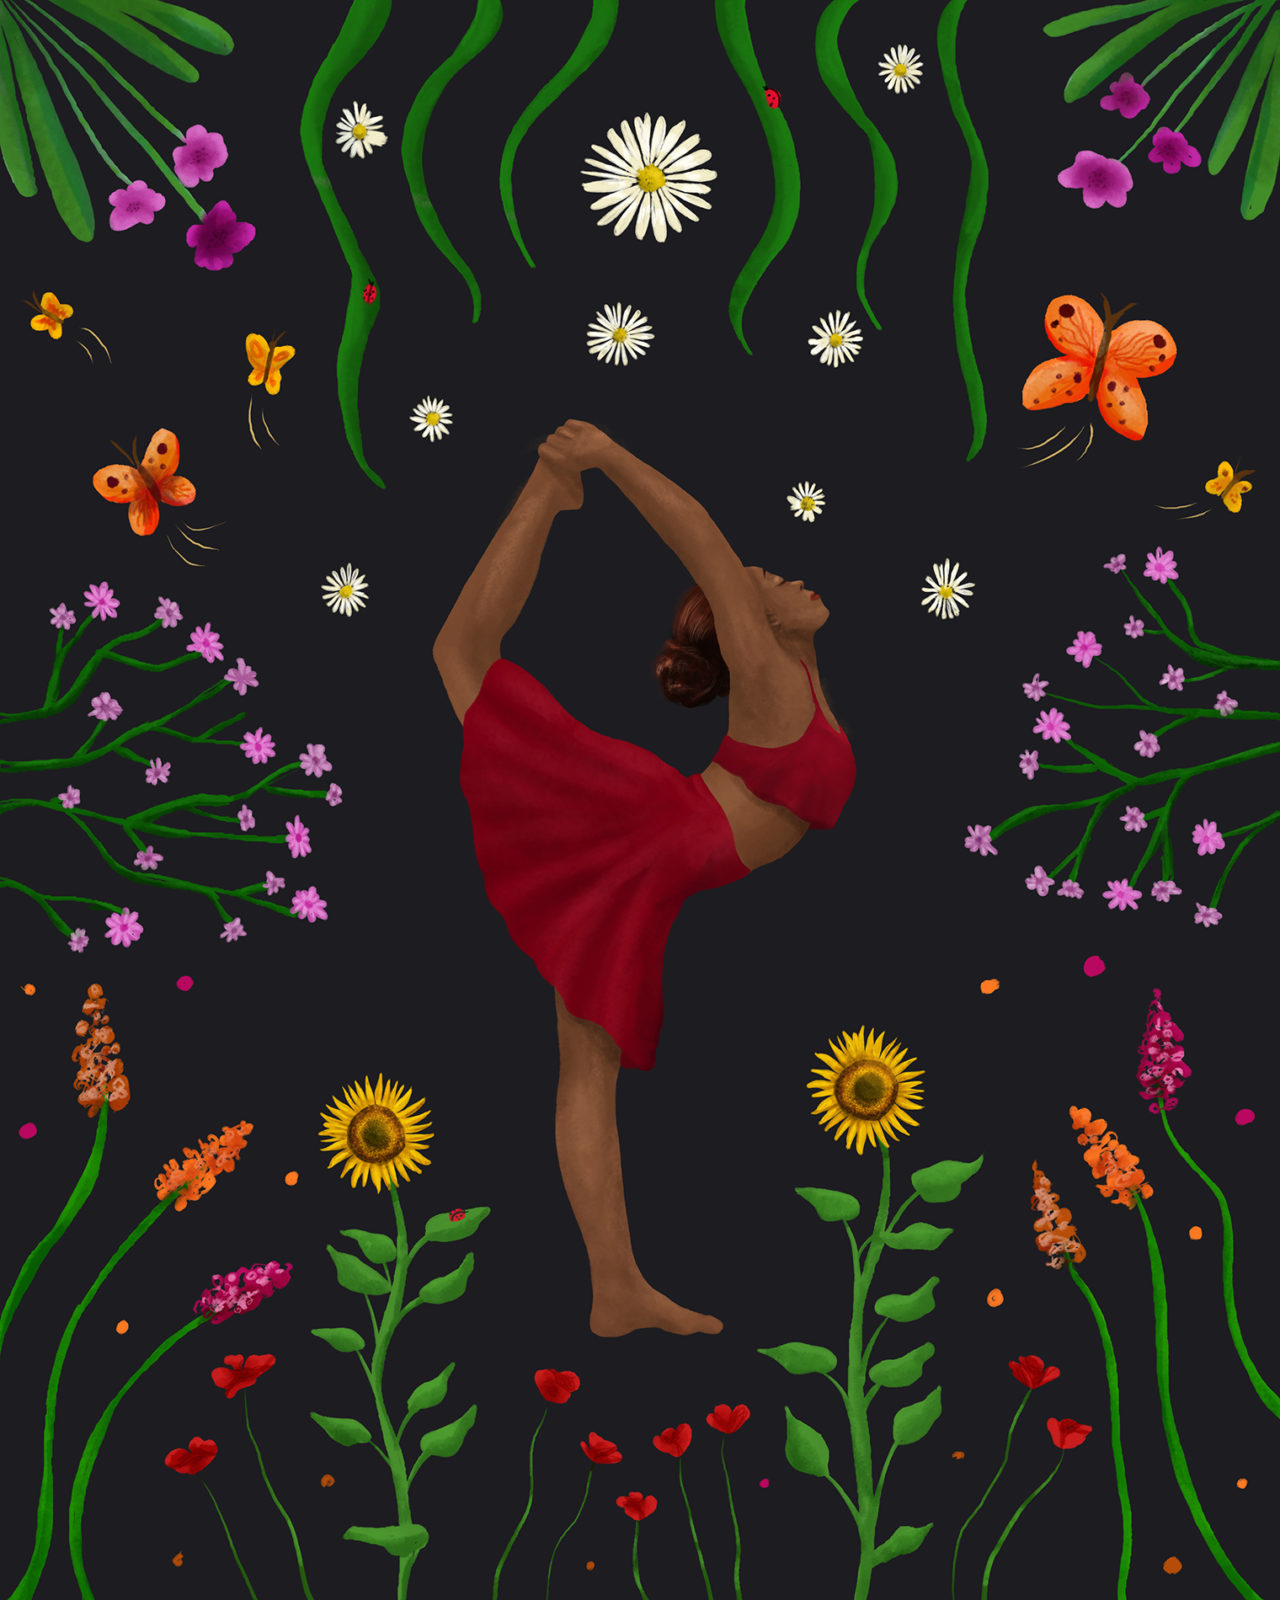 Yoga illustration showing a woman doing yoga in summer season, surrounded by blossoming flowers and butterflies.